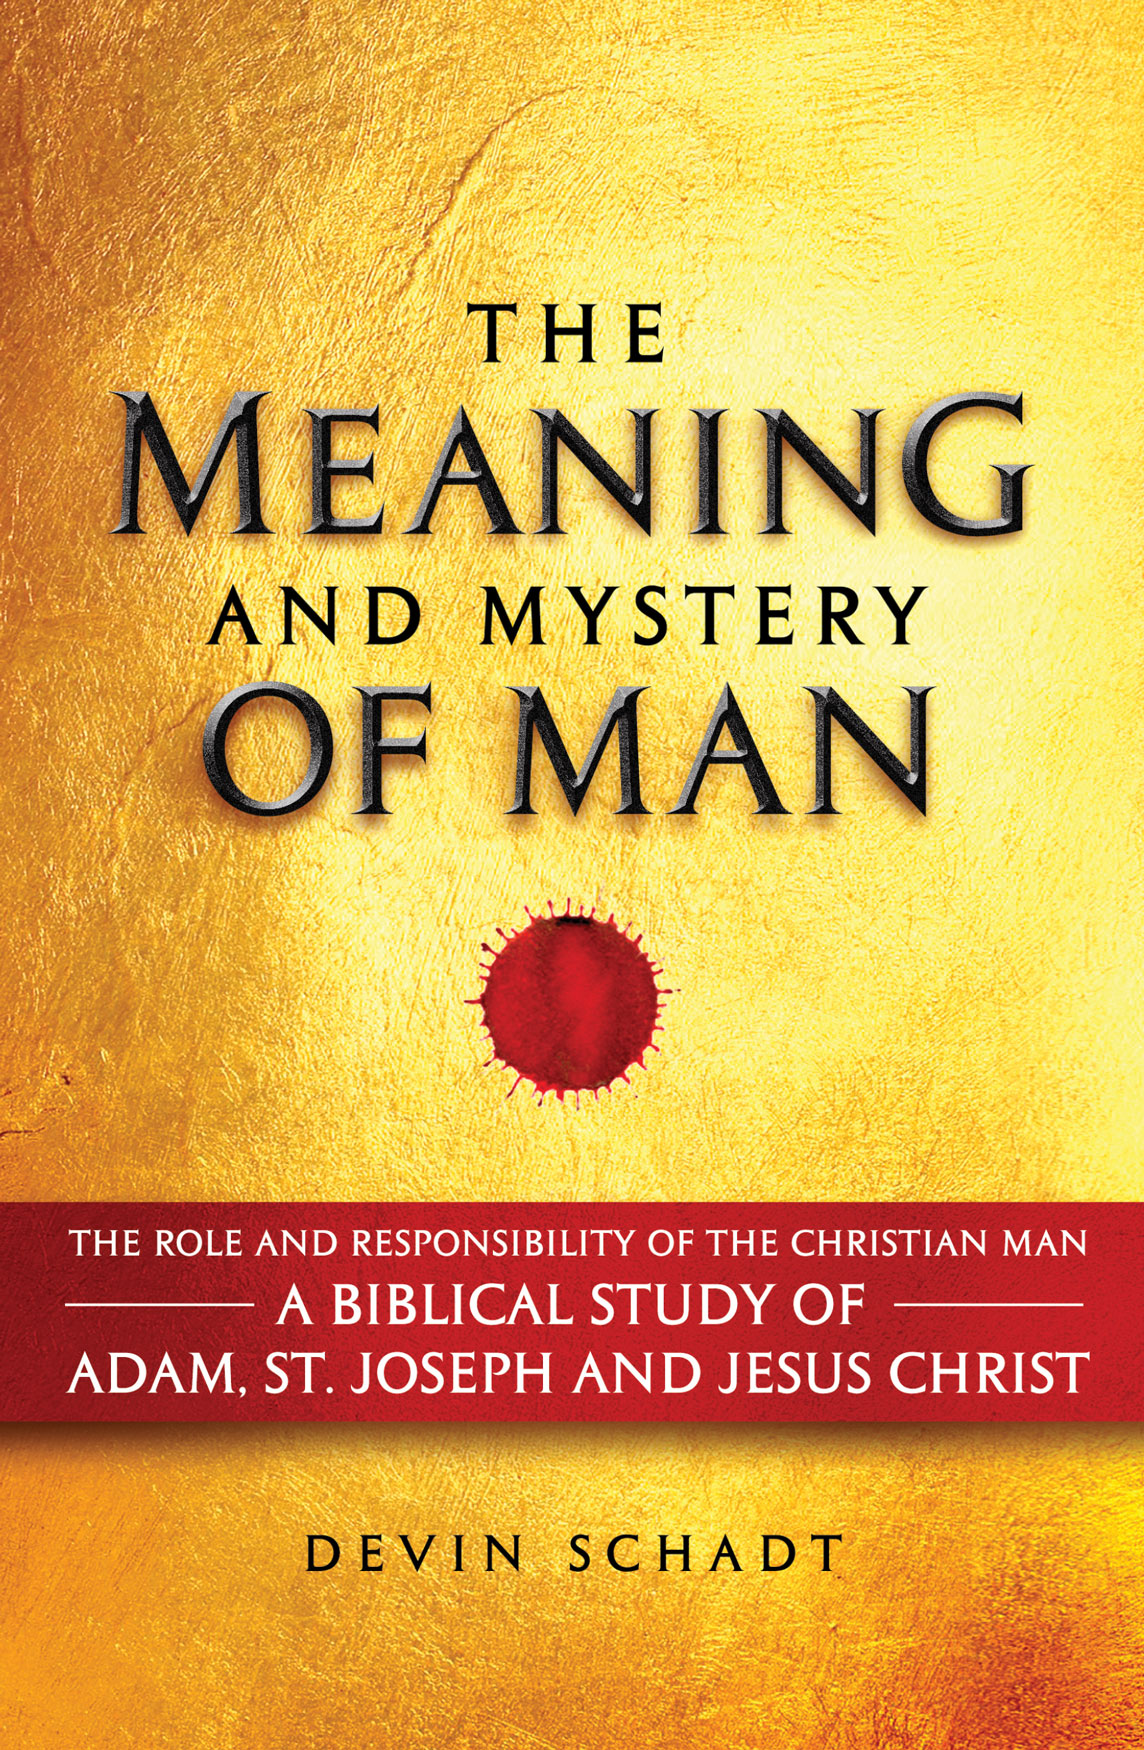 The Meaning and Mystery of Man / Devin Schadt